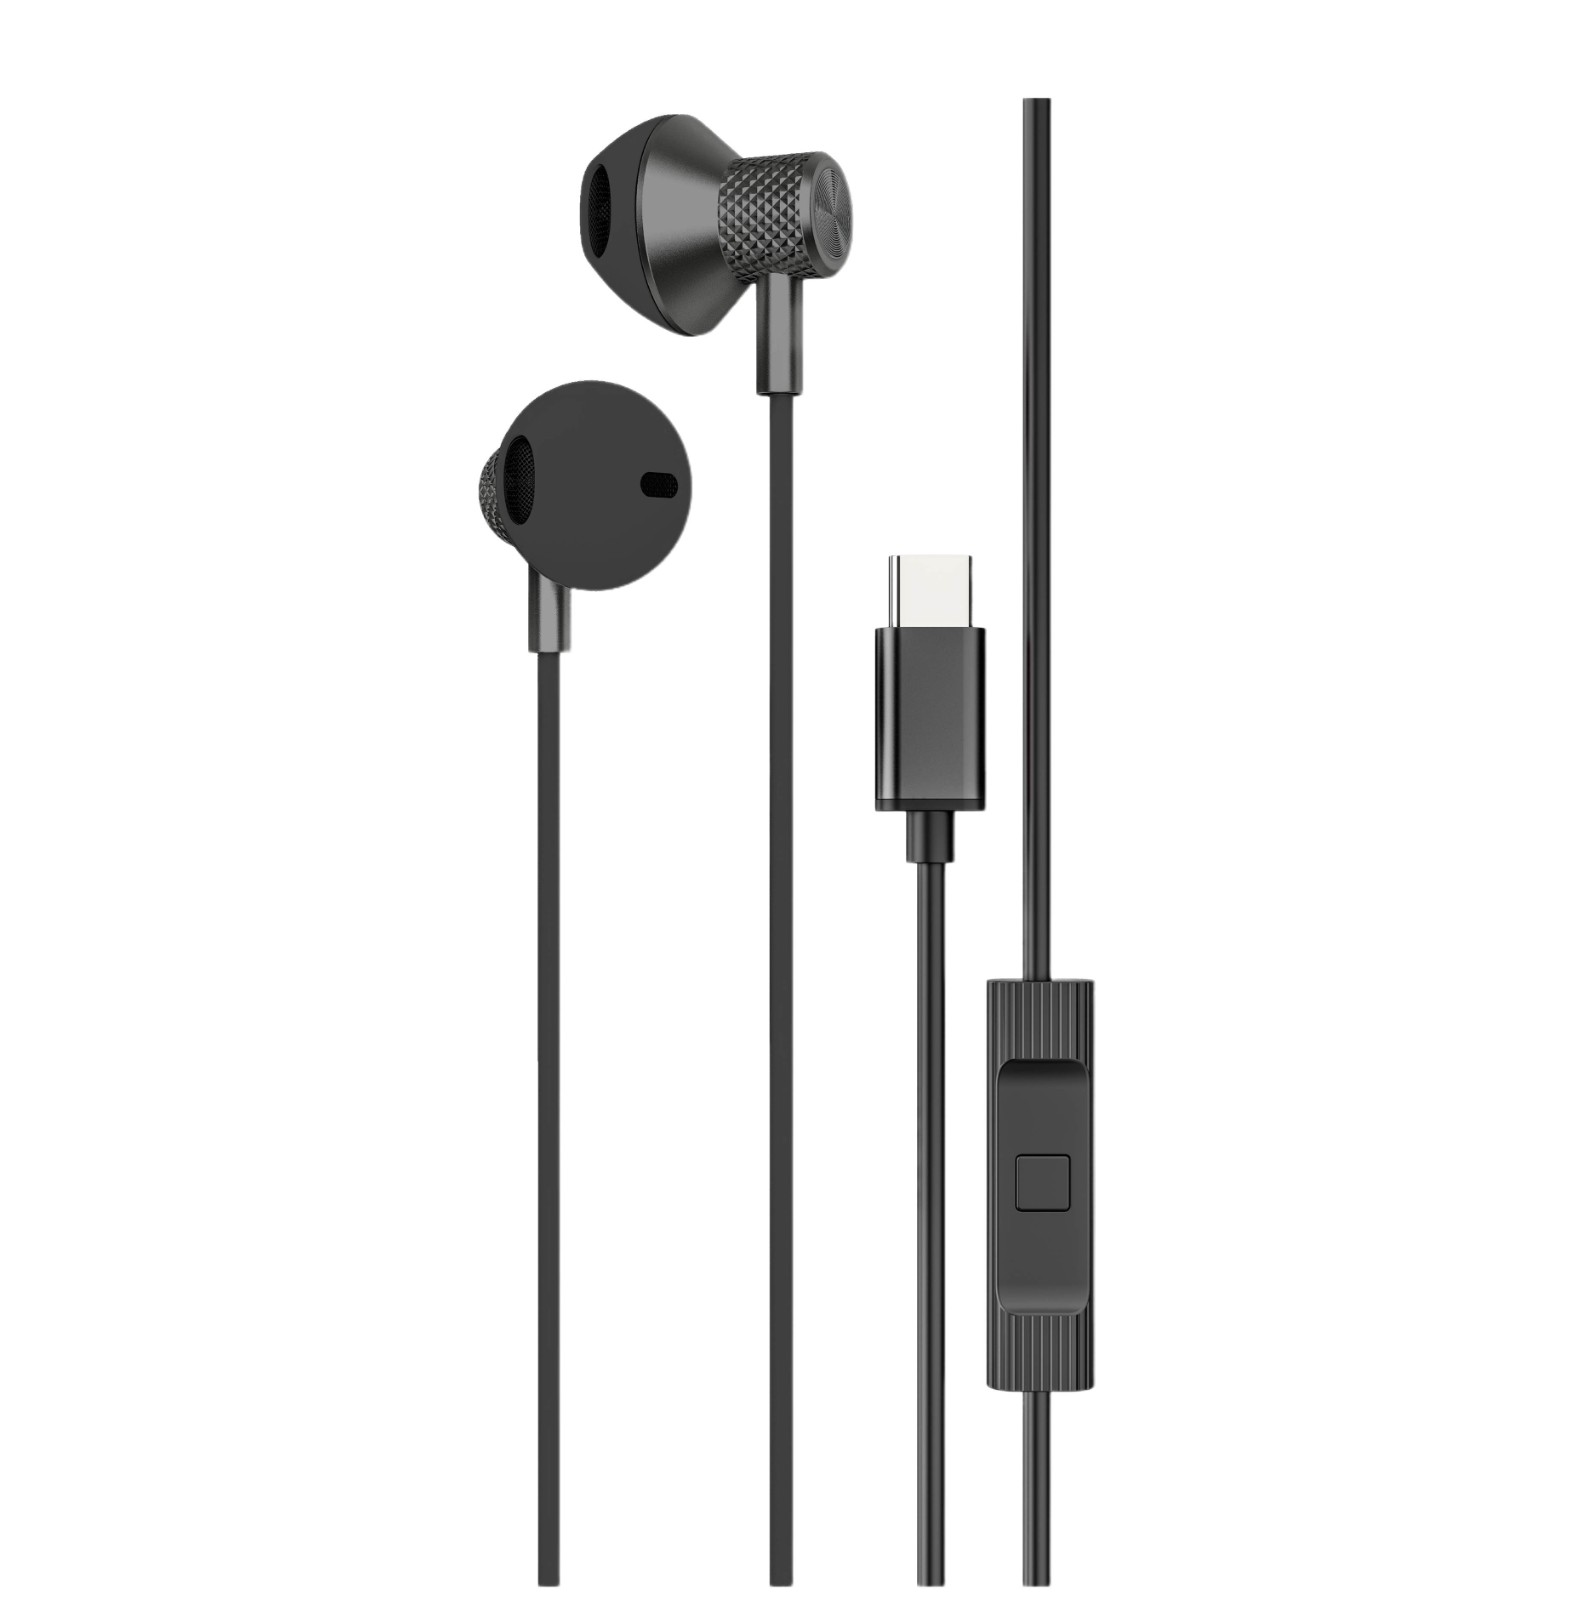 LS-730 In-ear Wired Earphone HiFi Headphones With Subwoofer Earbuds Earphones TYPE-C Music Sports Gaming Headset With Mic BLACK